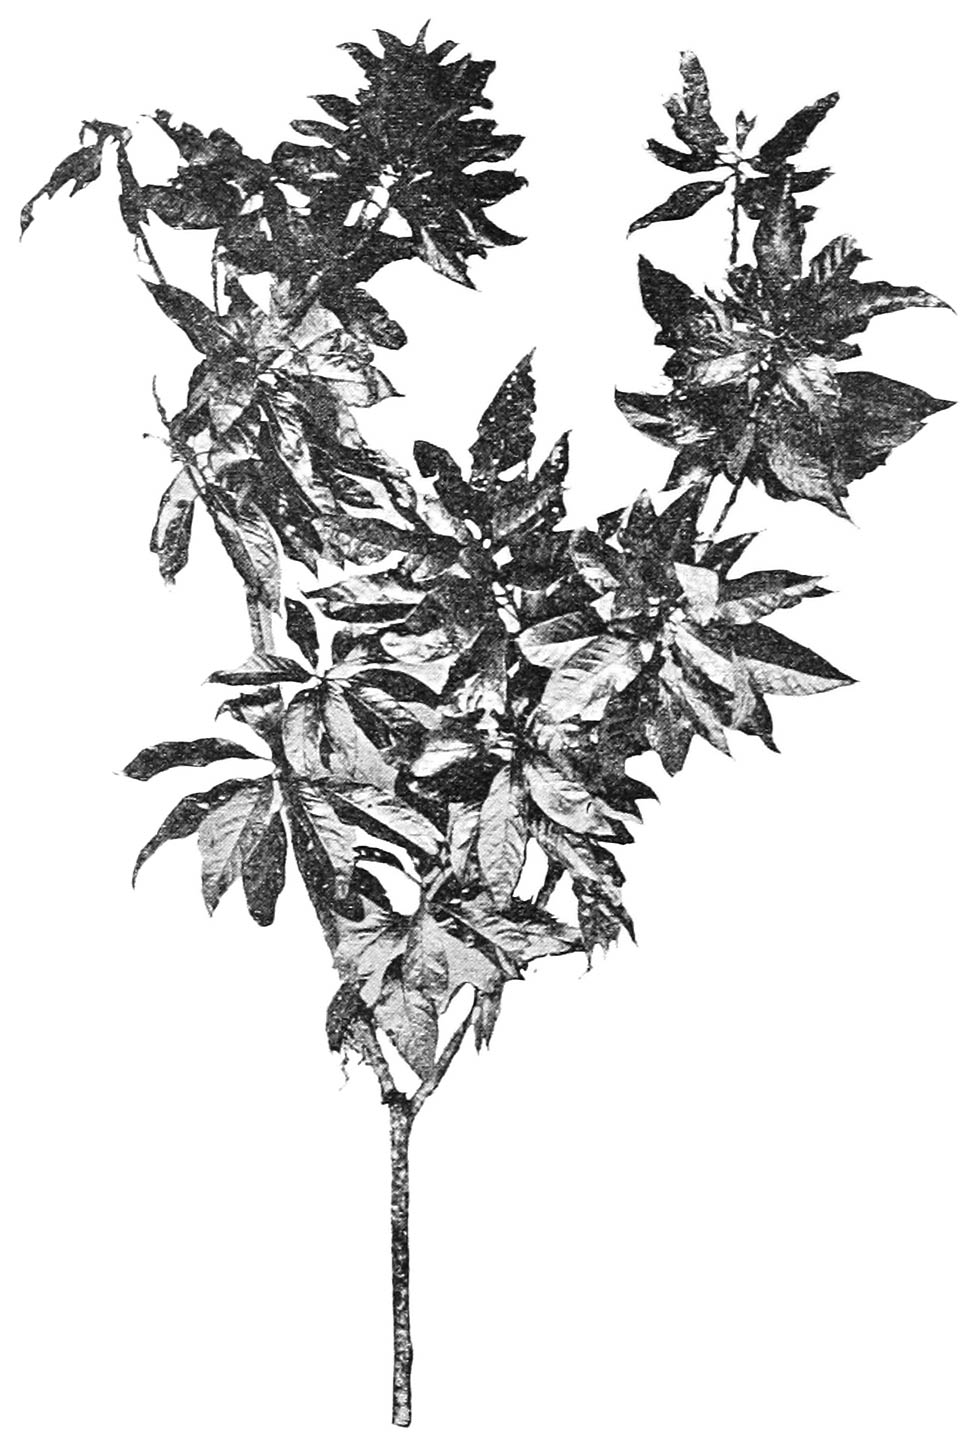 FIG. 58.—BOUGH OF THE ‘TUDR’ TREE. (From Marshall.)